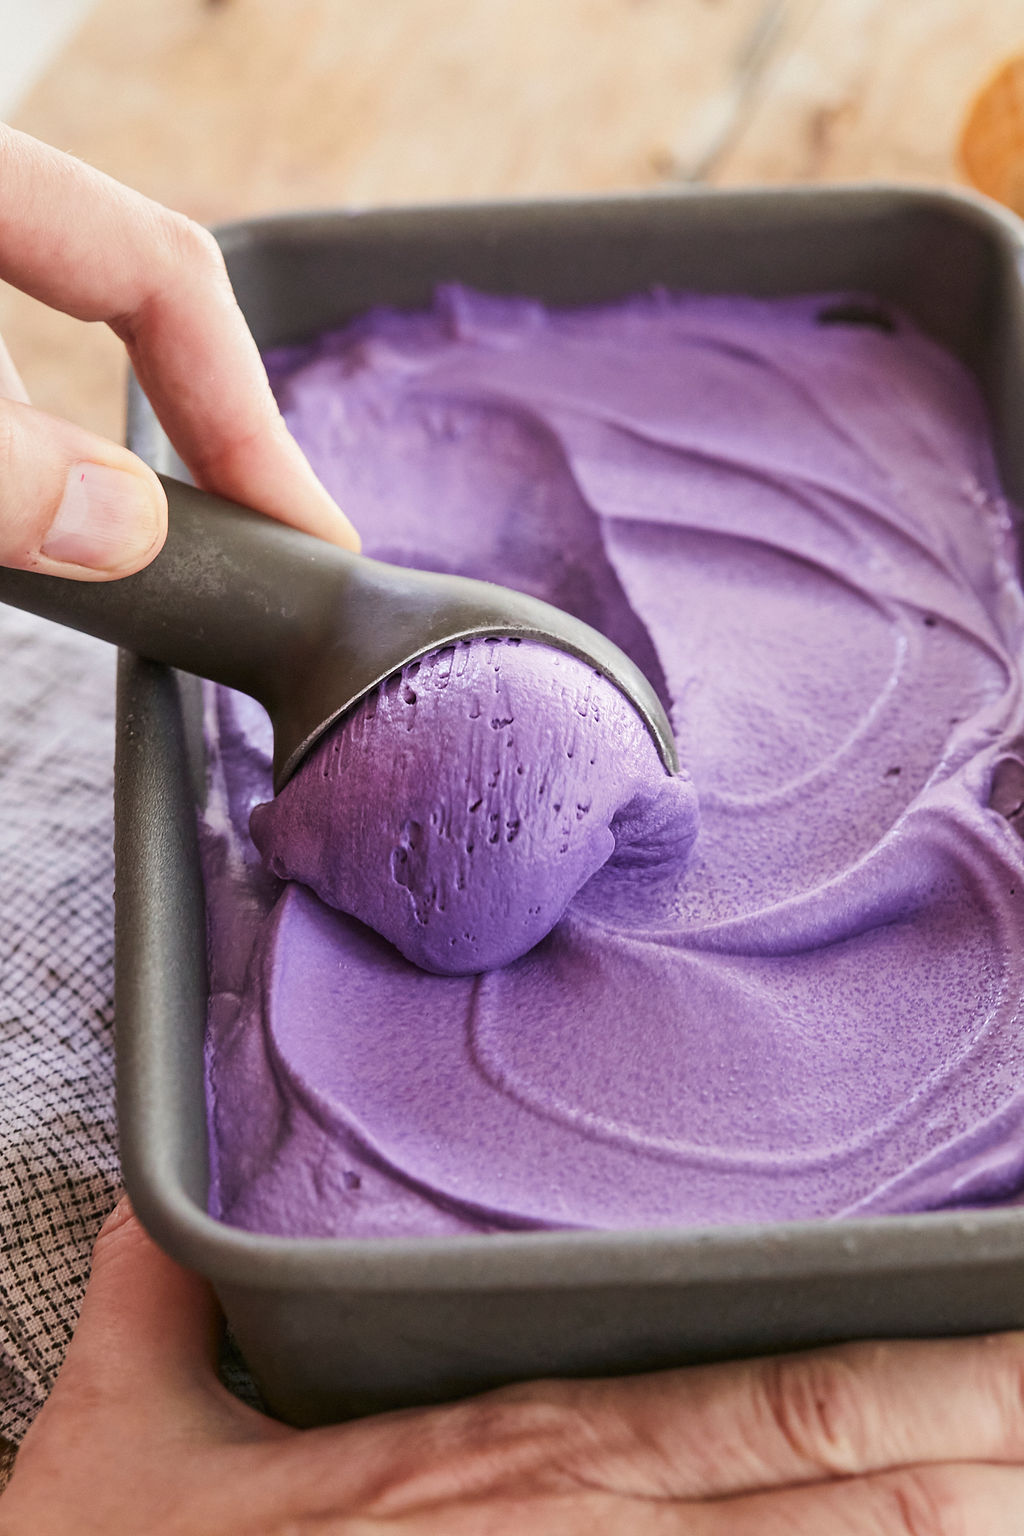 A close up scoop of purple Ube Ice Cream to show texture, color, and how easy it is to scoop.